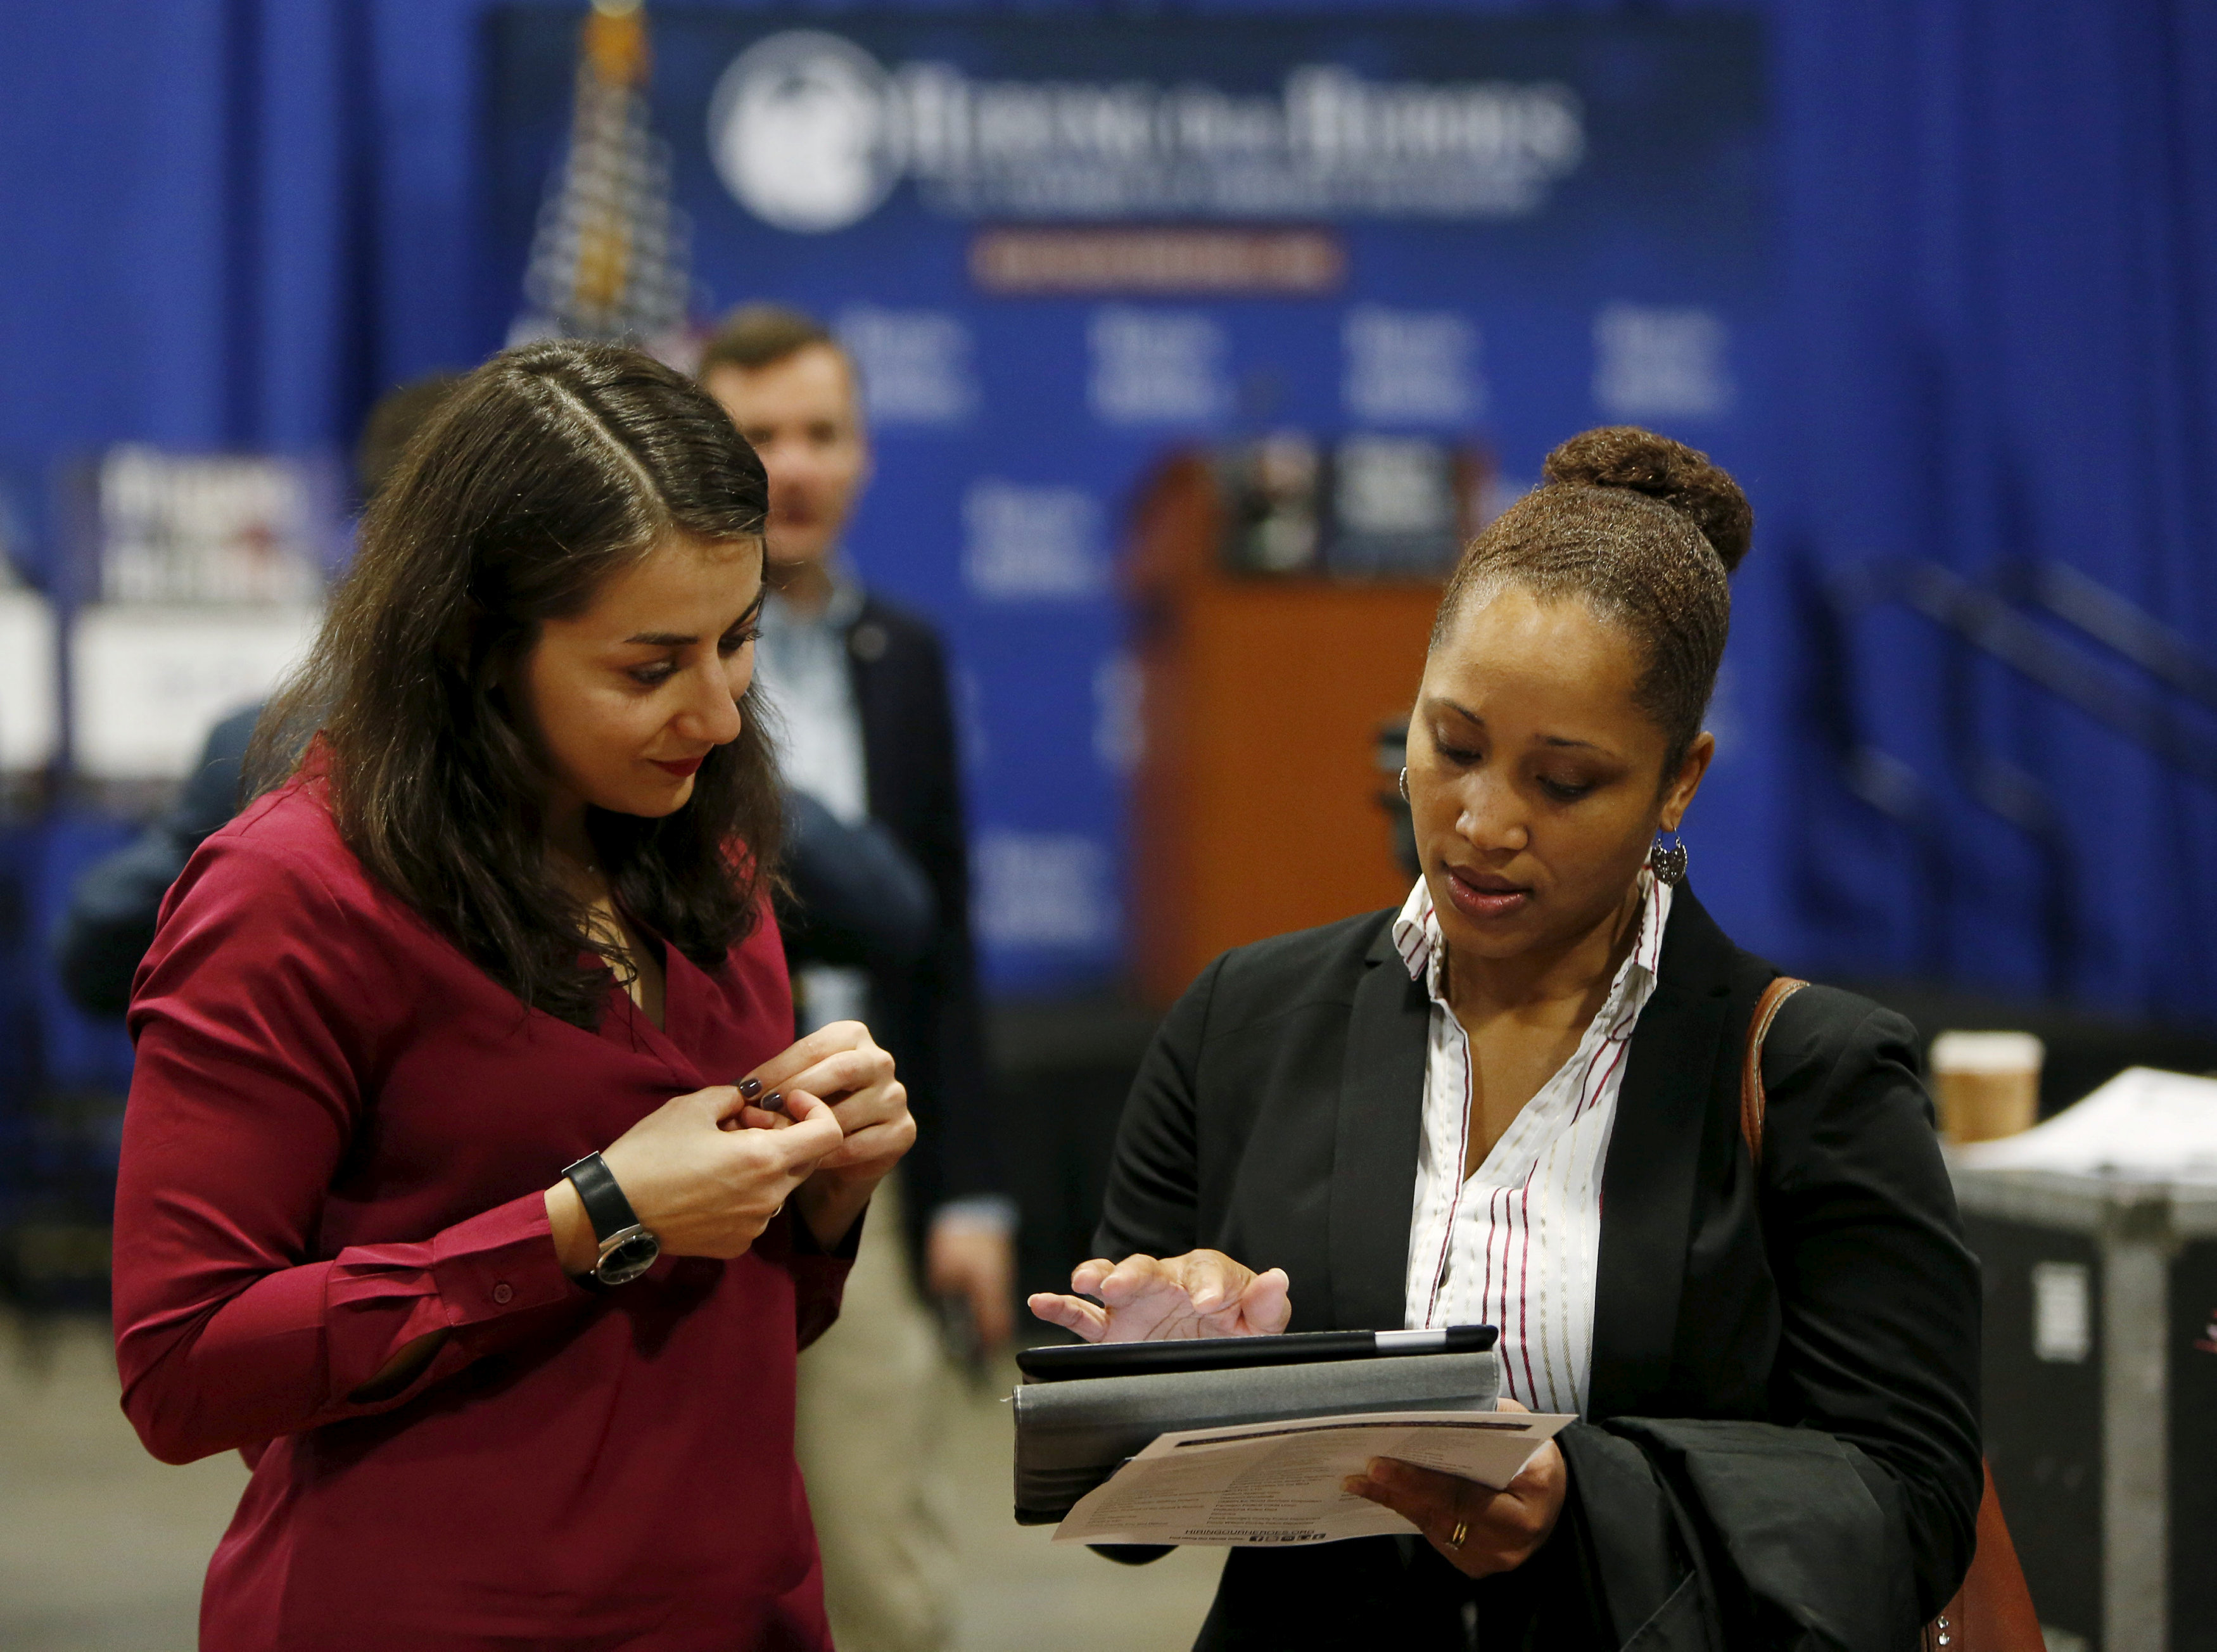 US job growth slows in July, unemployment rate drops